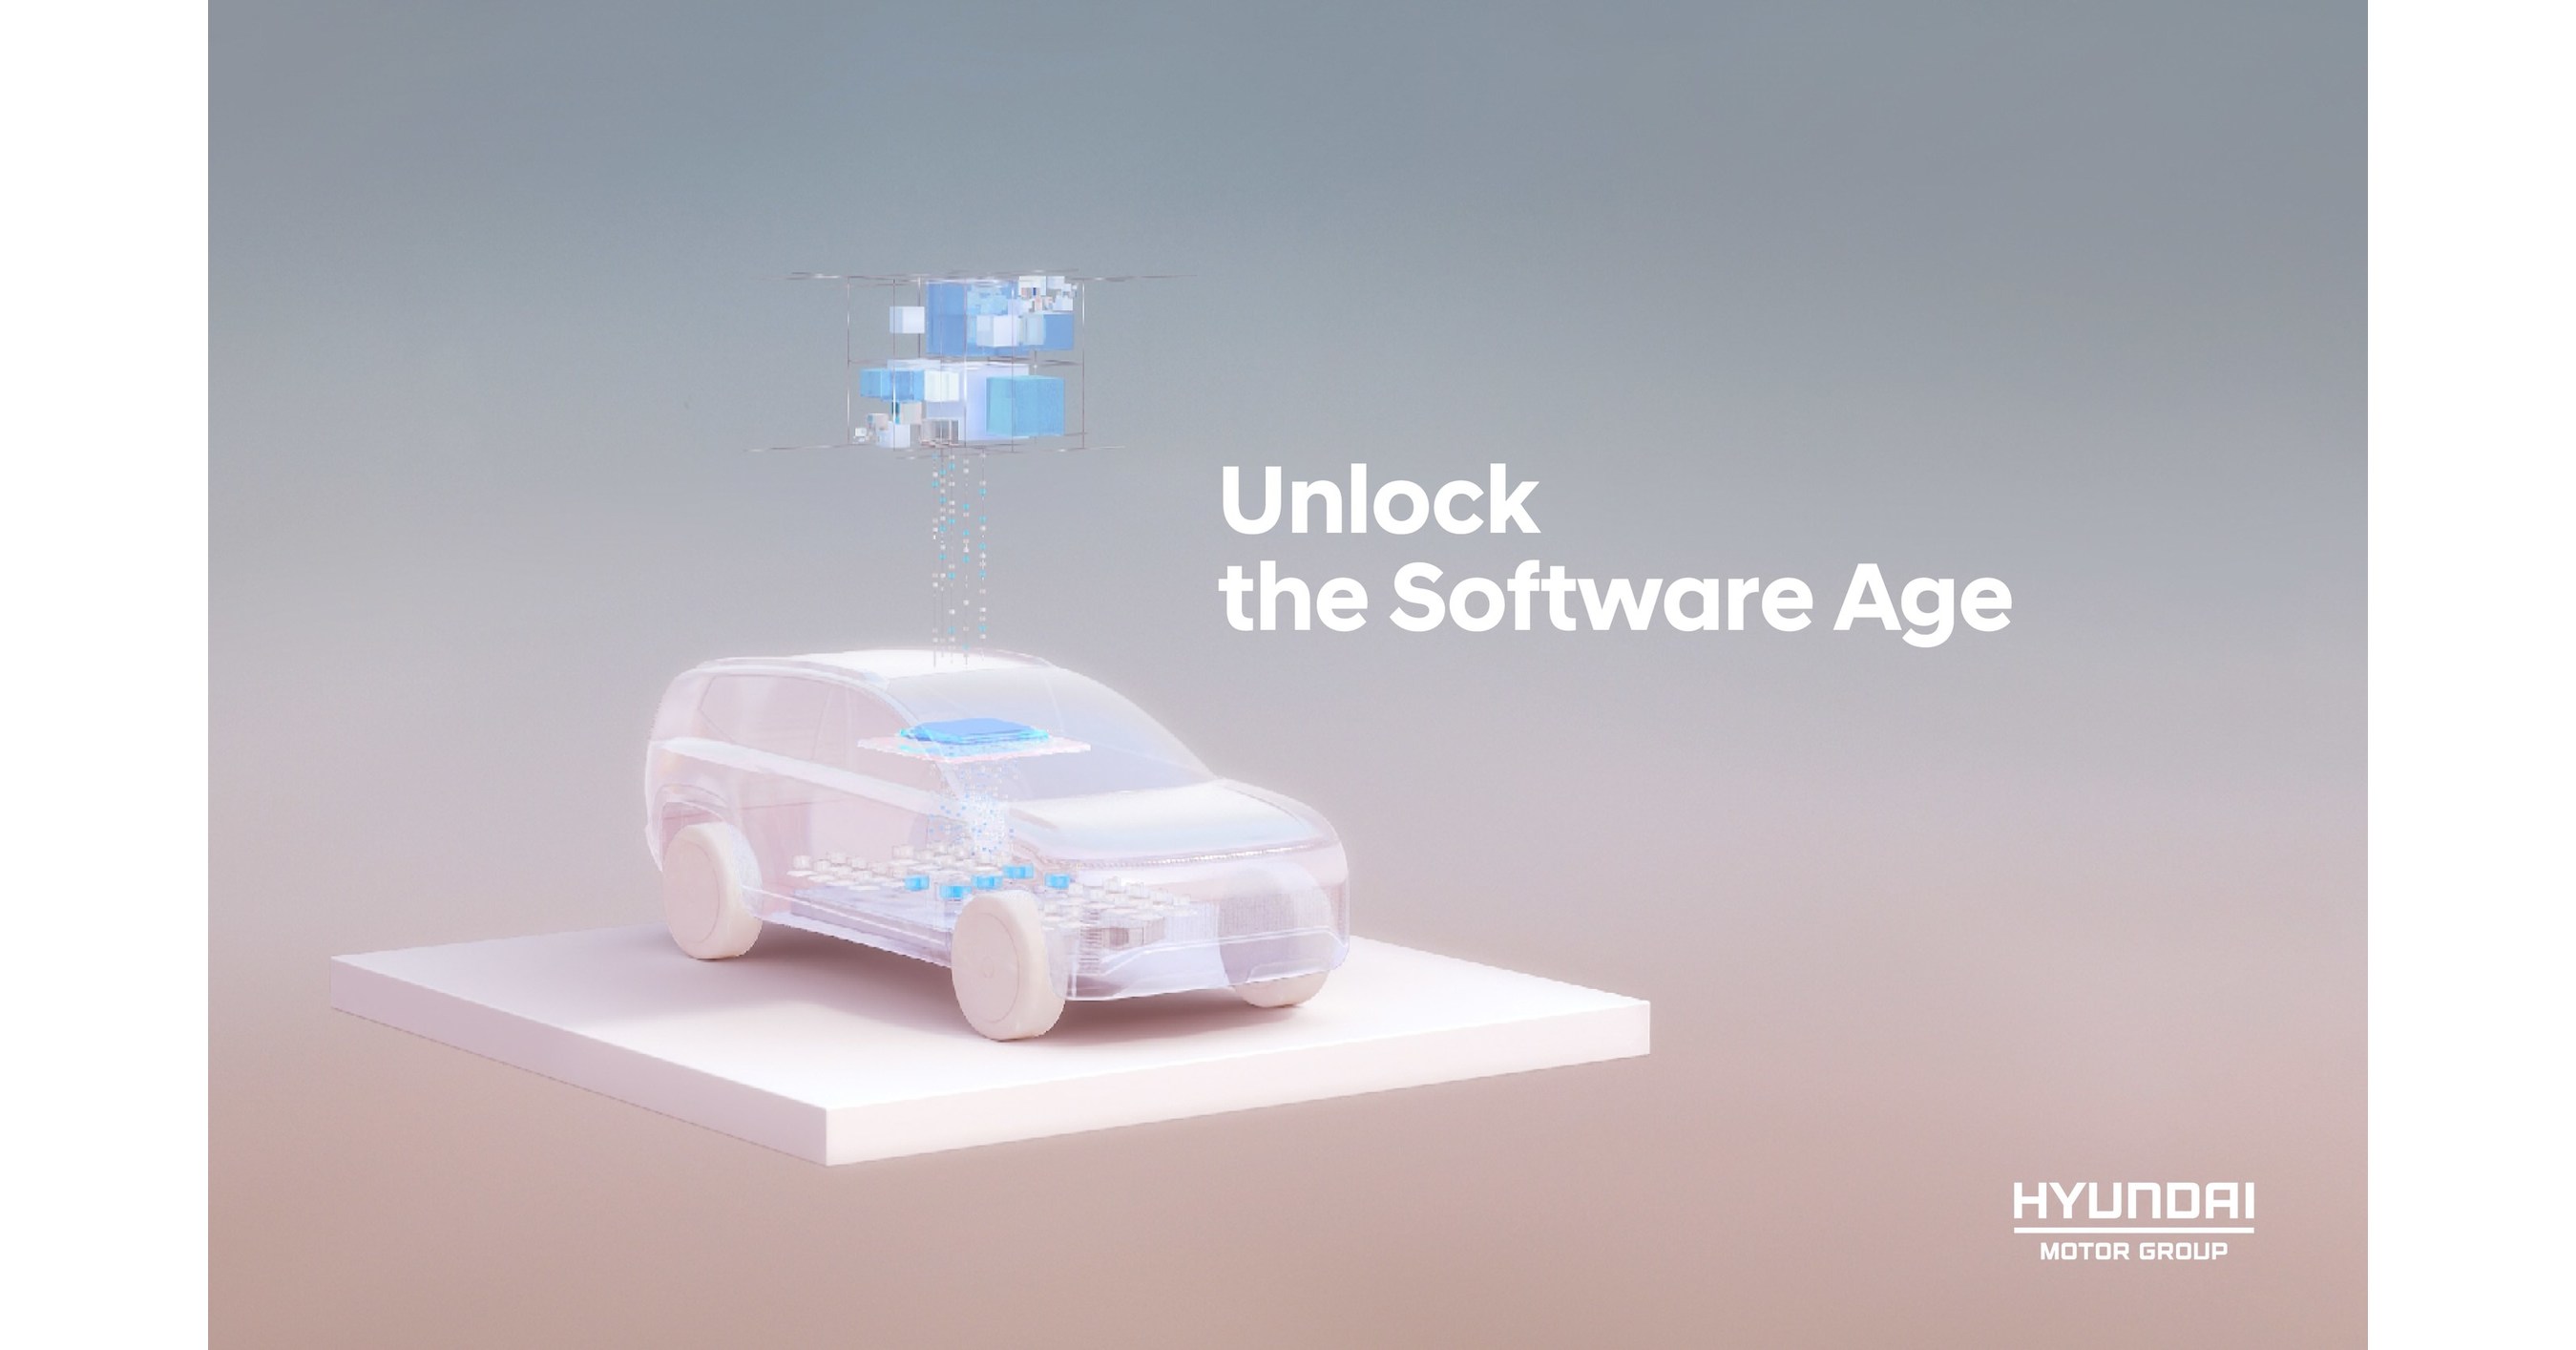 Hyundai Motor Group Announces Future Roadmap for Software Defined Vehicles  at Unlock the Software Age Global Forum